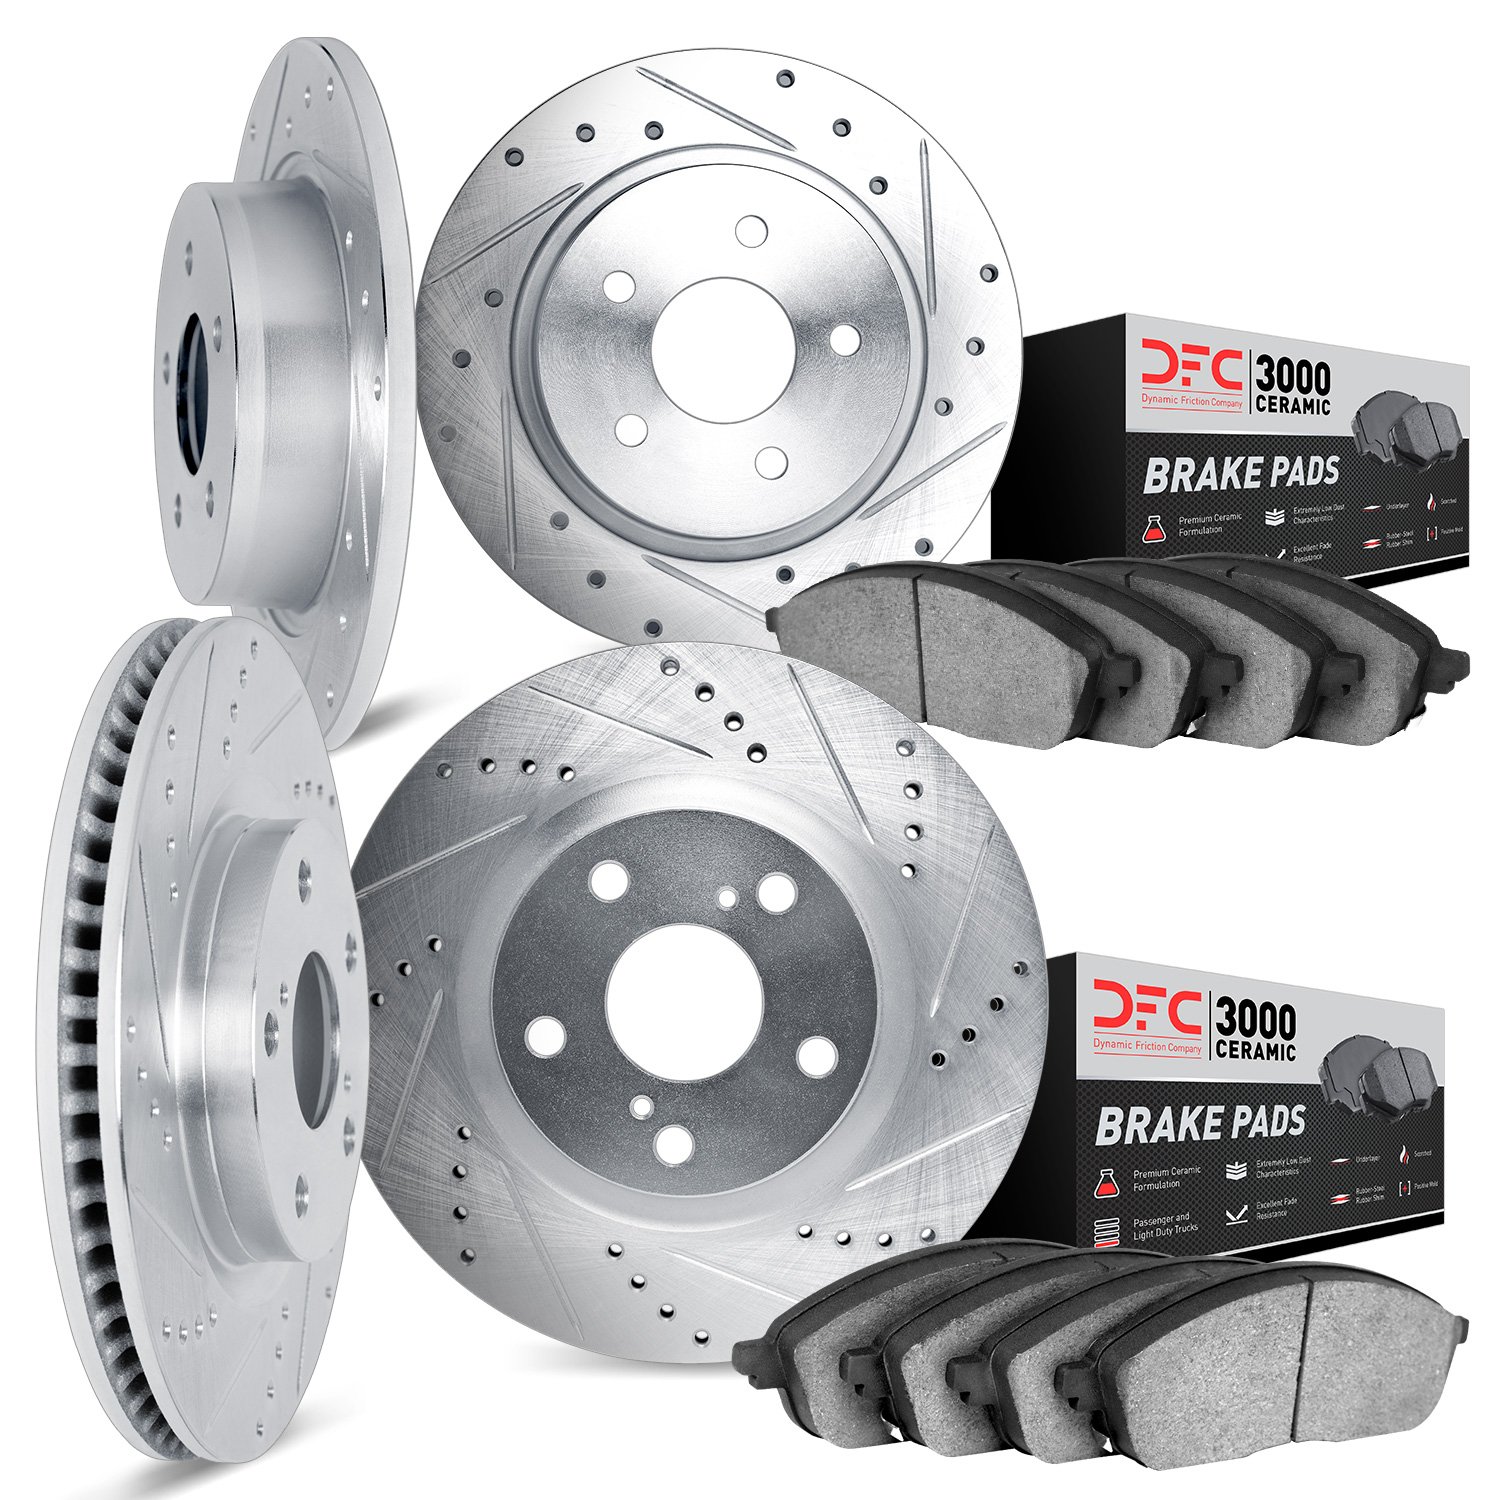 7304-80024 Drilled/Slotted Brake Rotor with 3000-Series Ceramic Brake Pads Kit [Silver], 2003-2005 Ford/Lincoln/Mercury/Mazda, P